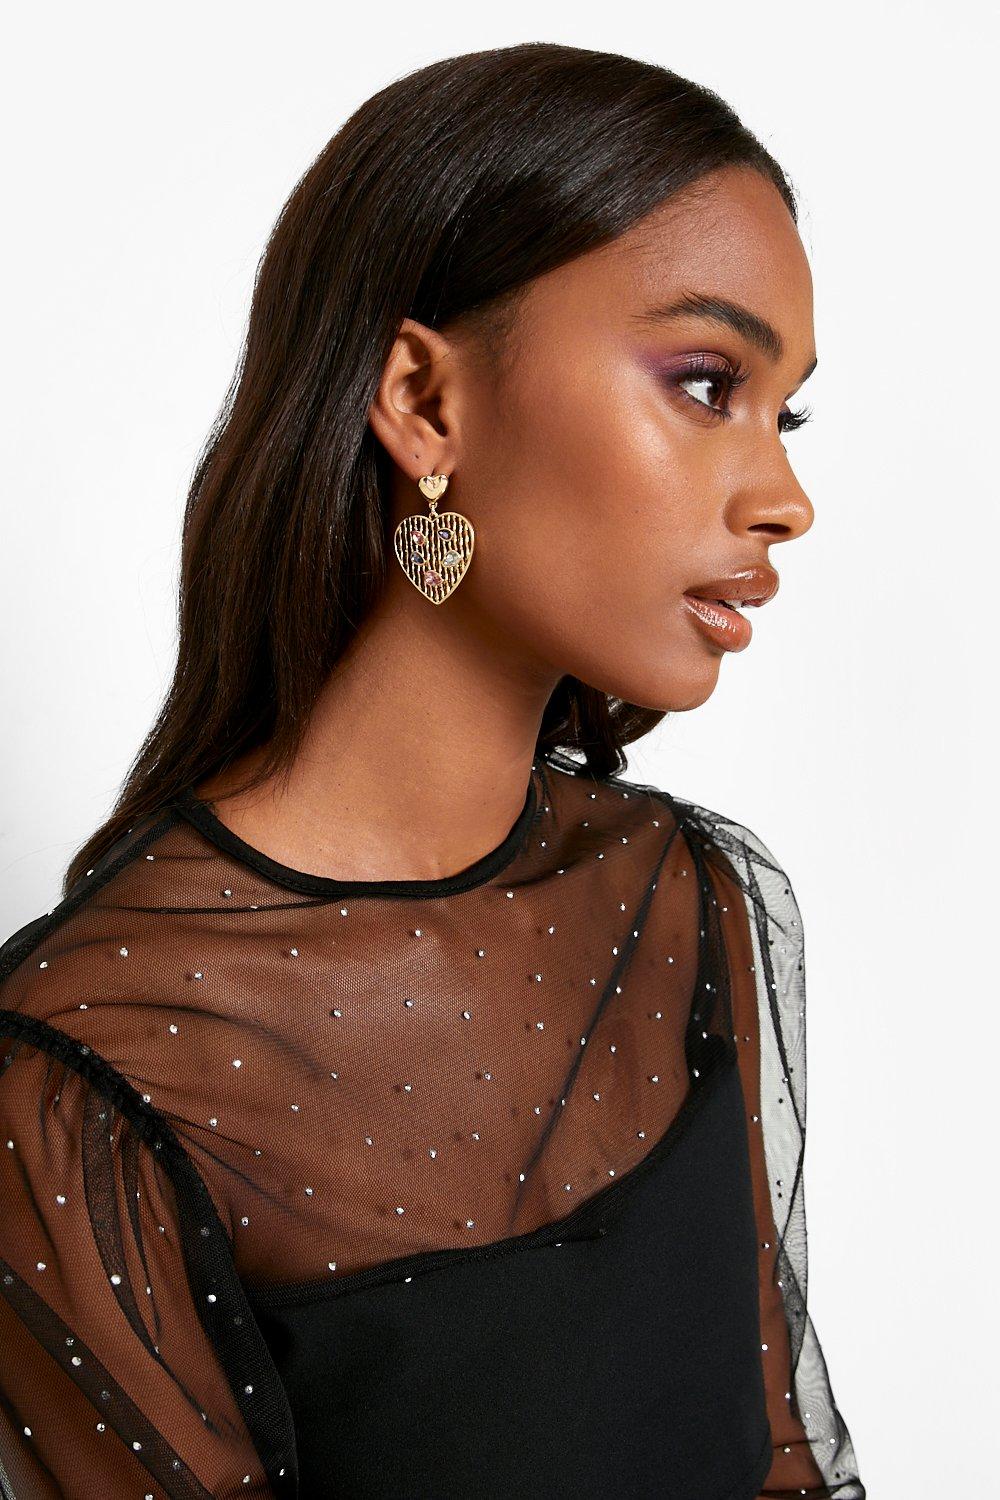 Boohoo Gold Drop Textured Heart Earrings  - Size: ONE SIZE